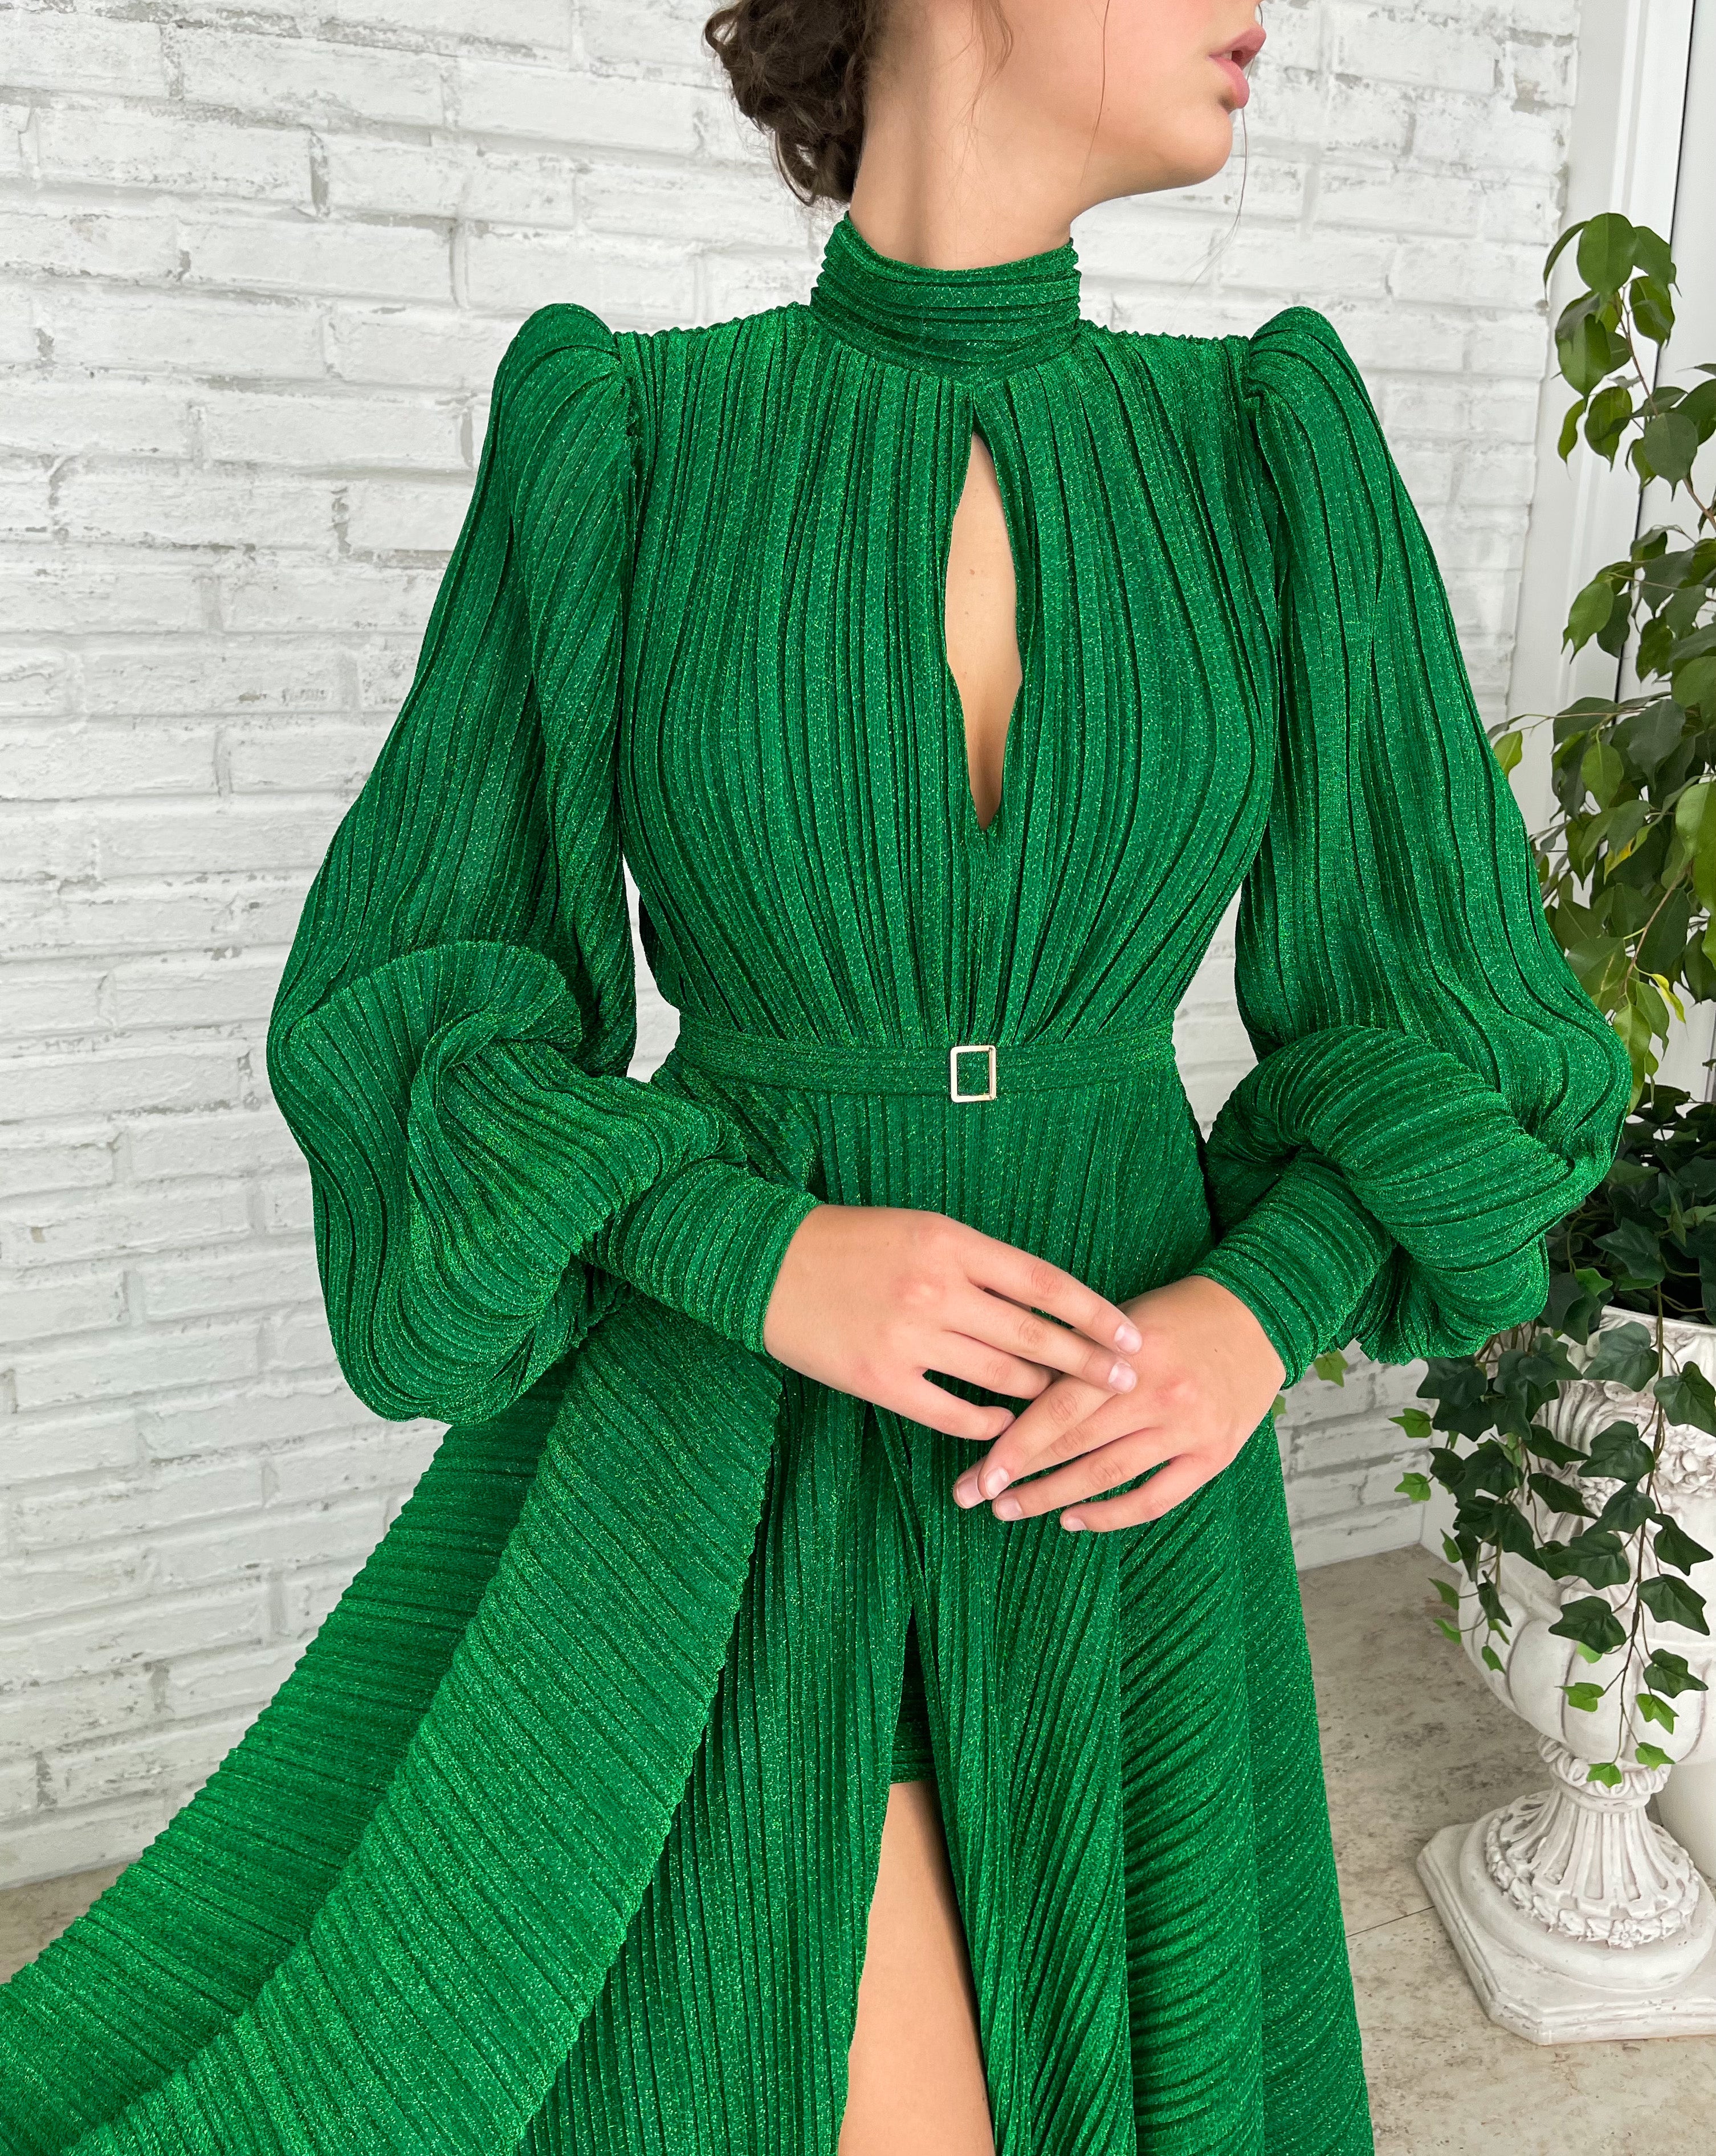 Green A-Line dress with belt and long sleeves